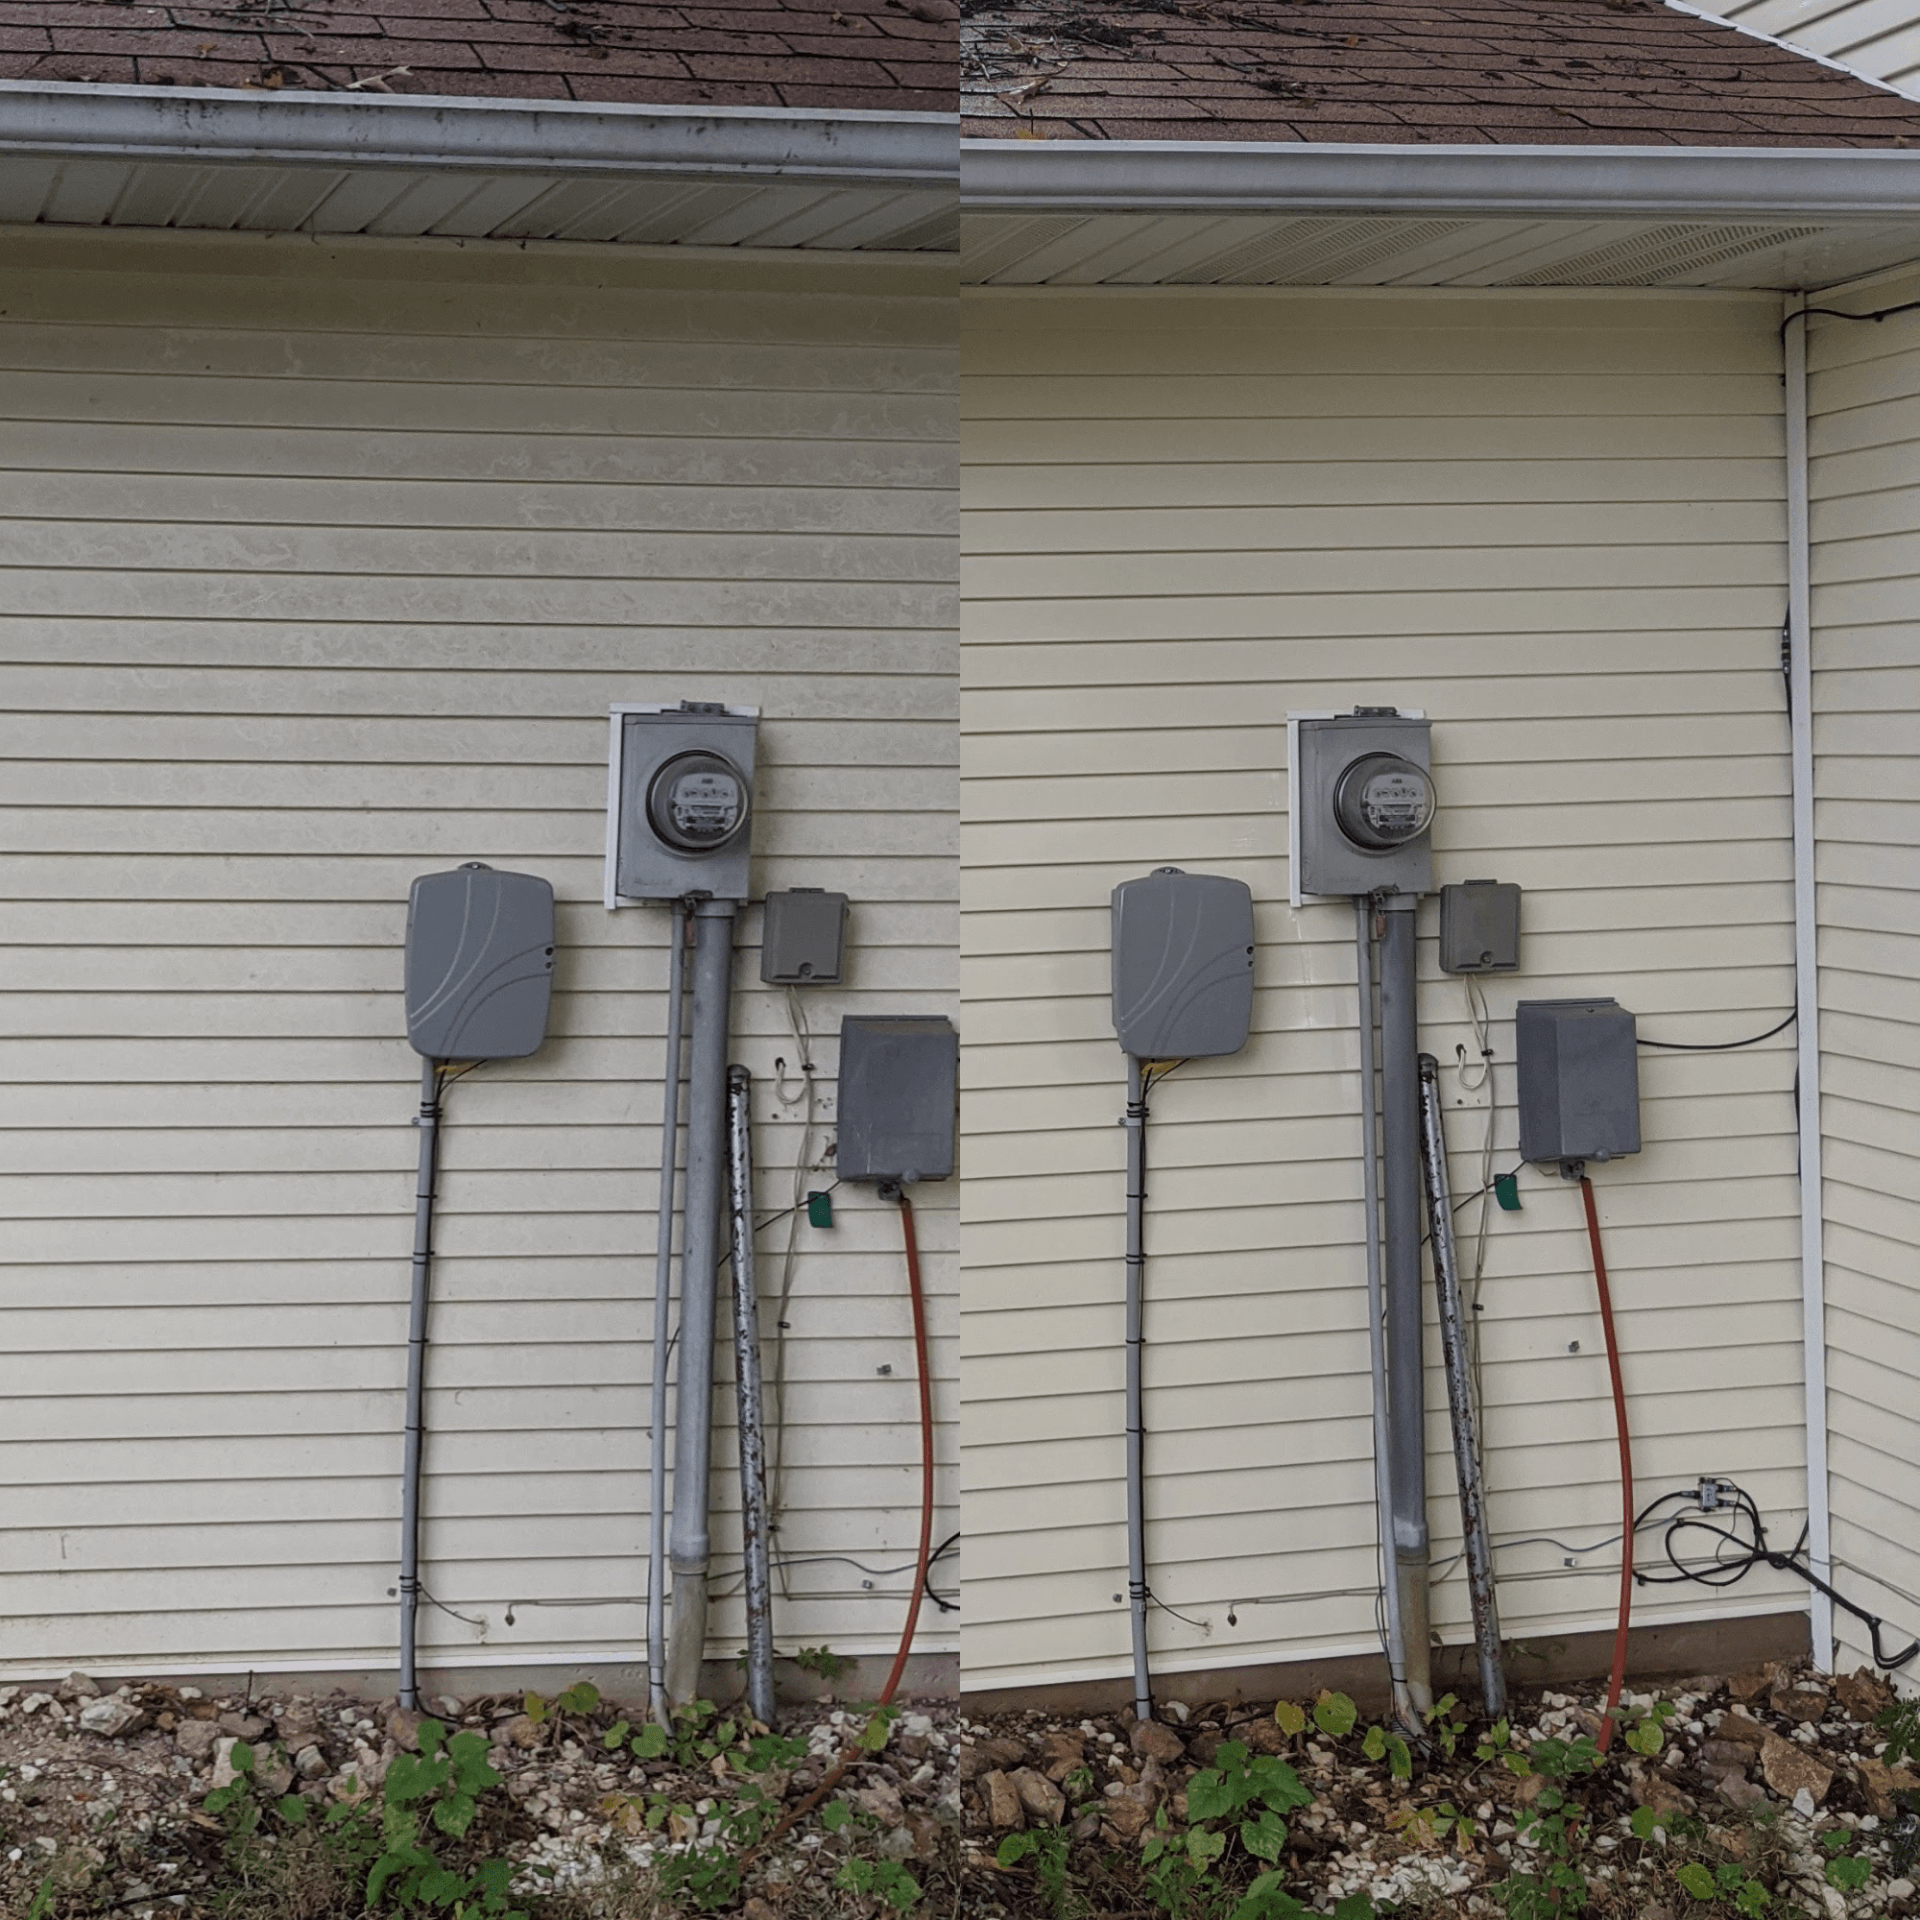 A row of electrical boxes on the side of a house